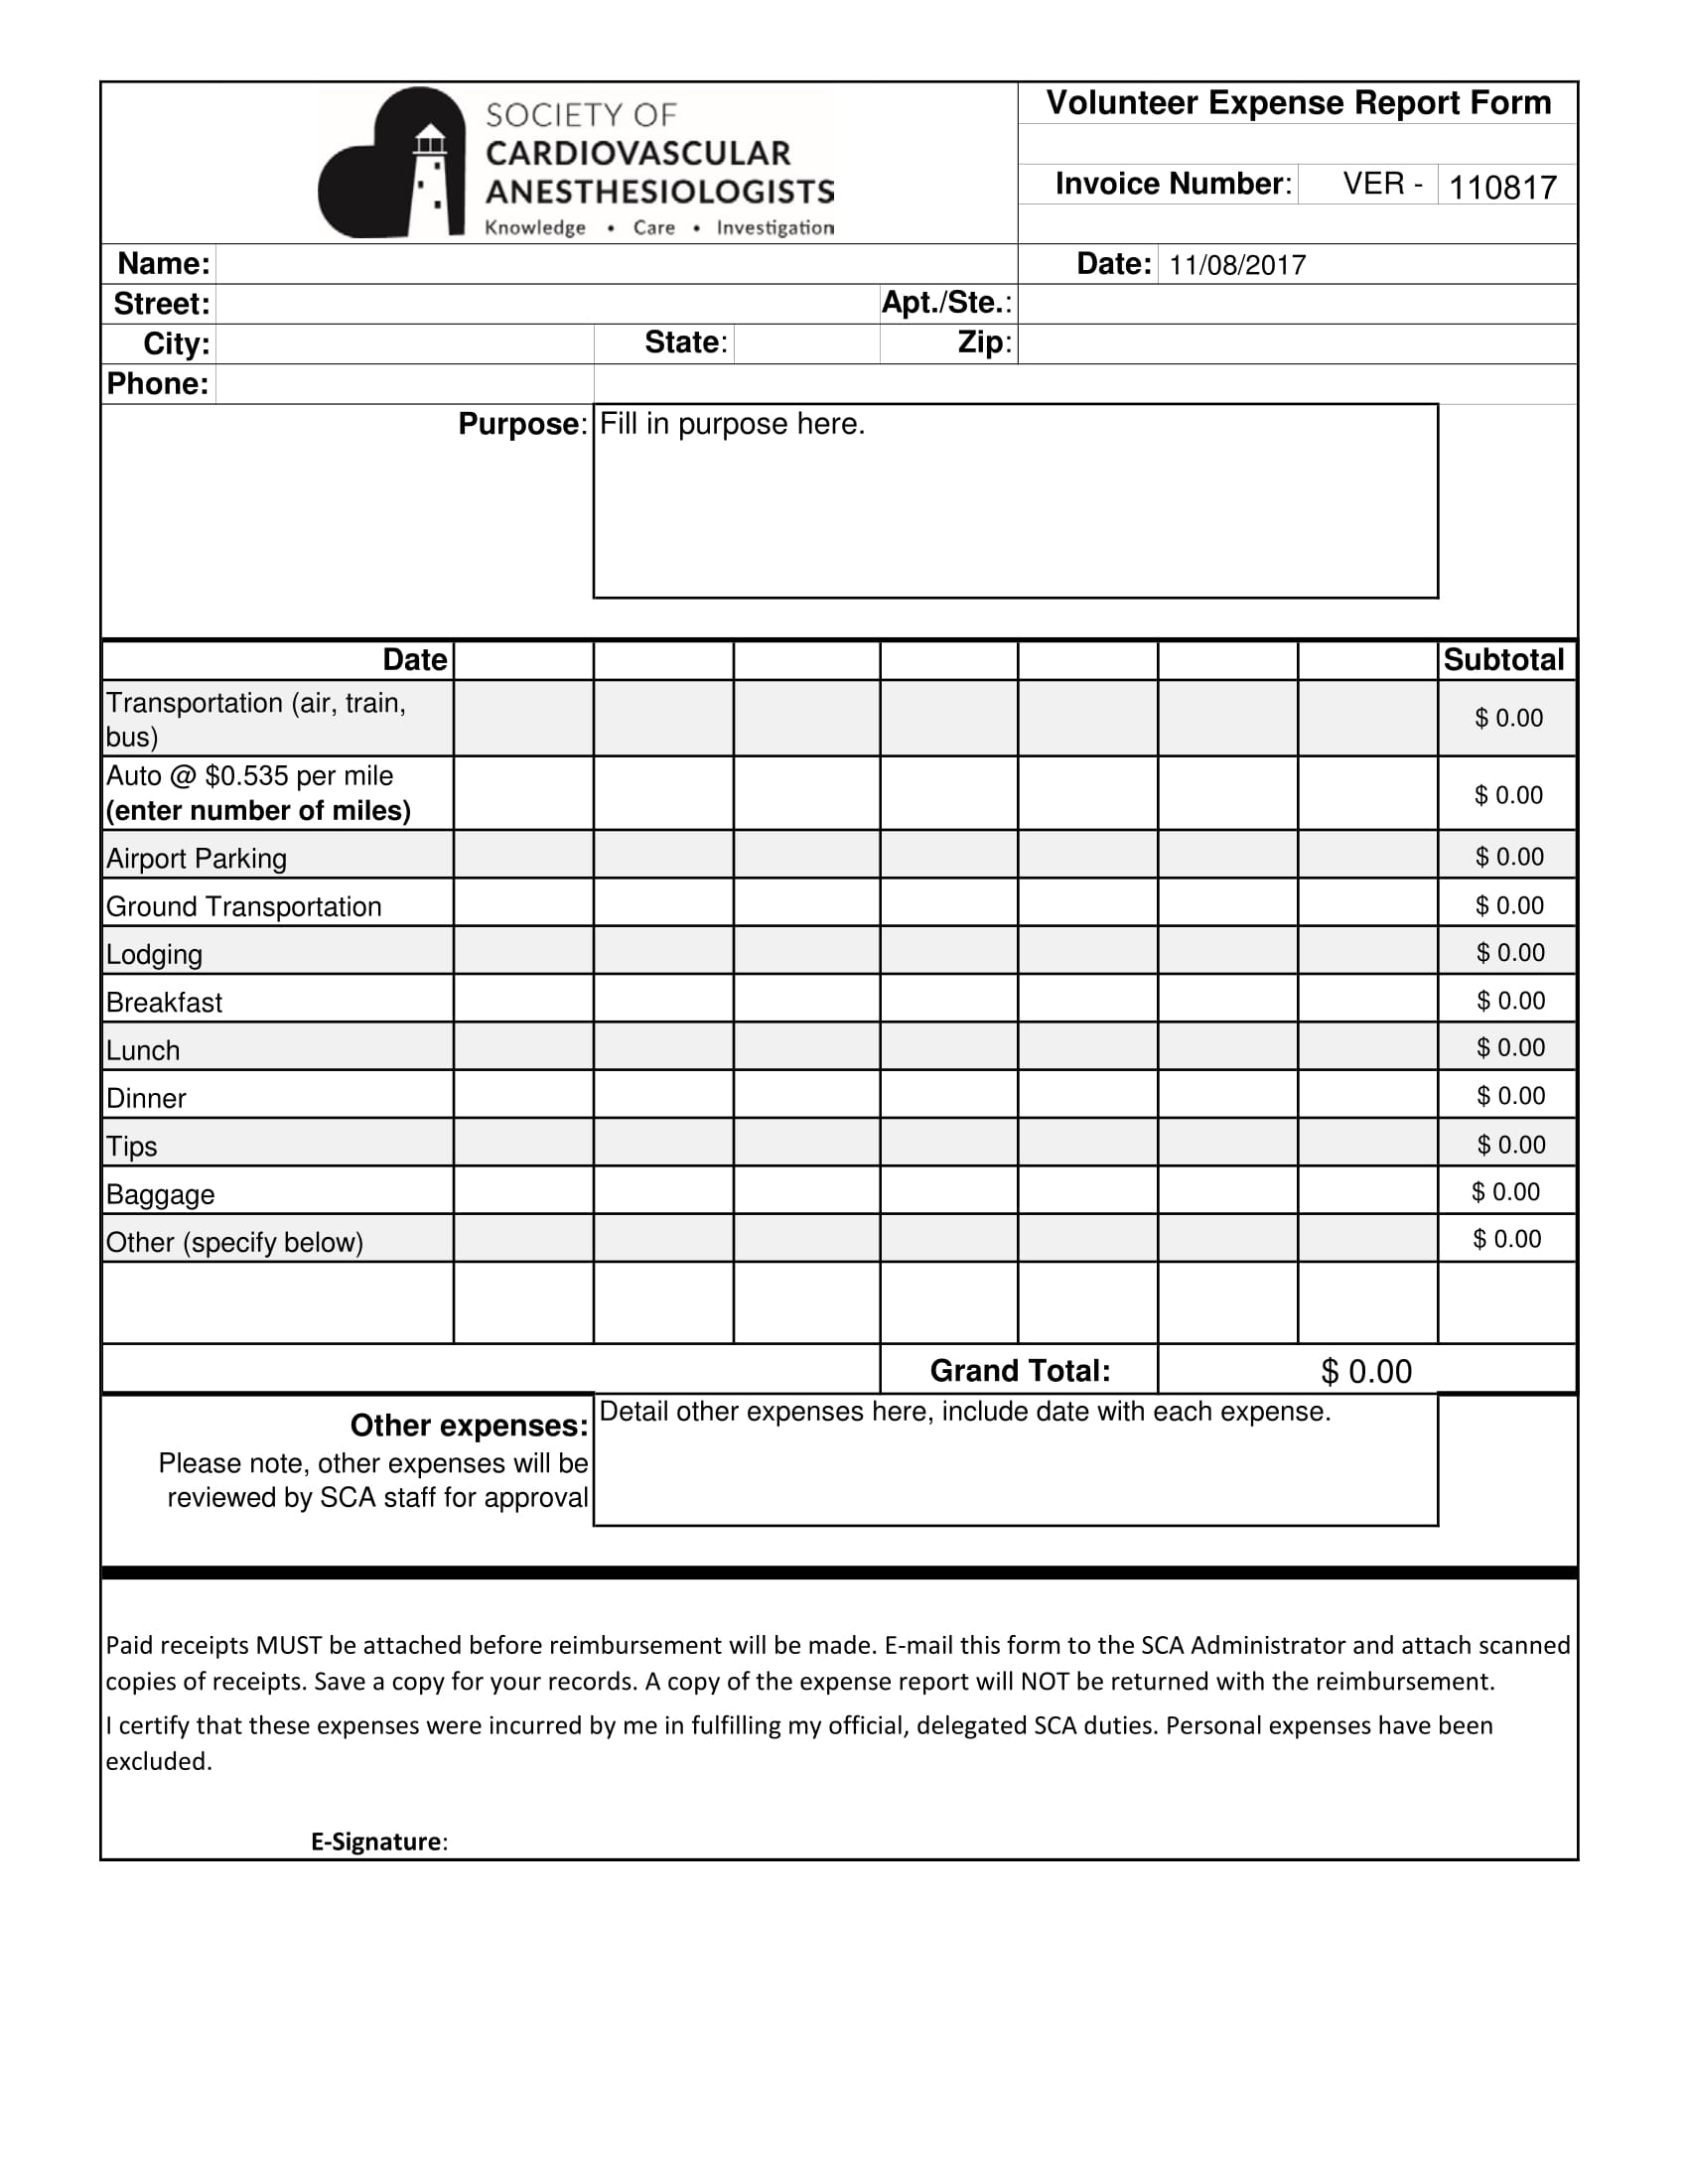 FREE 13+ Expense Report Forms in MS Word | PDF | Excel